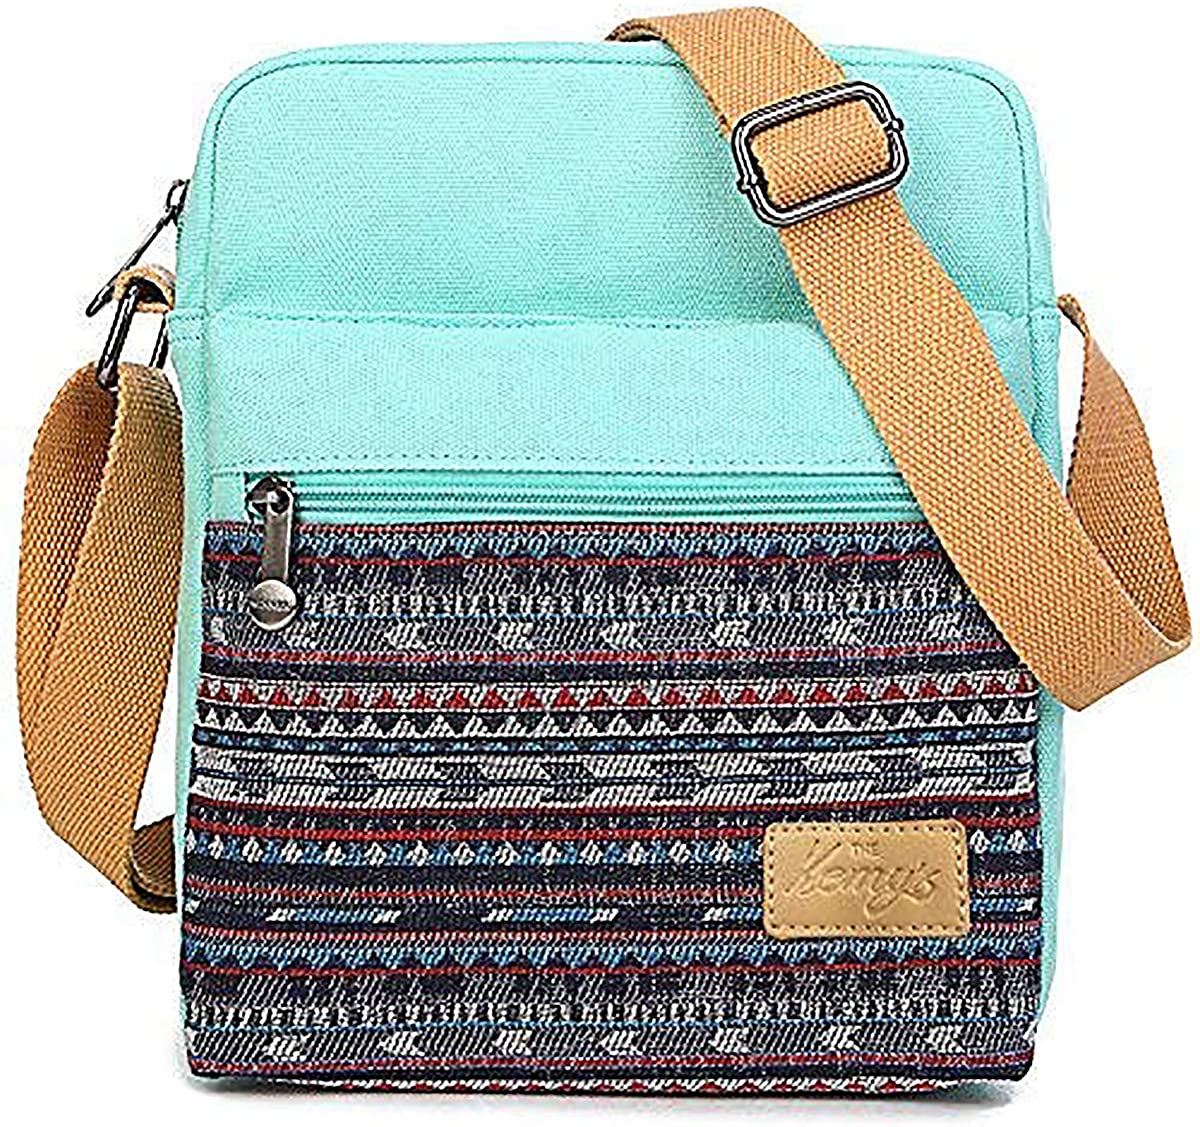 Vacally Small Lady Shoulders Bag Casual Backpack Letter Purse Messenger Bag 